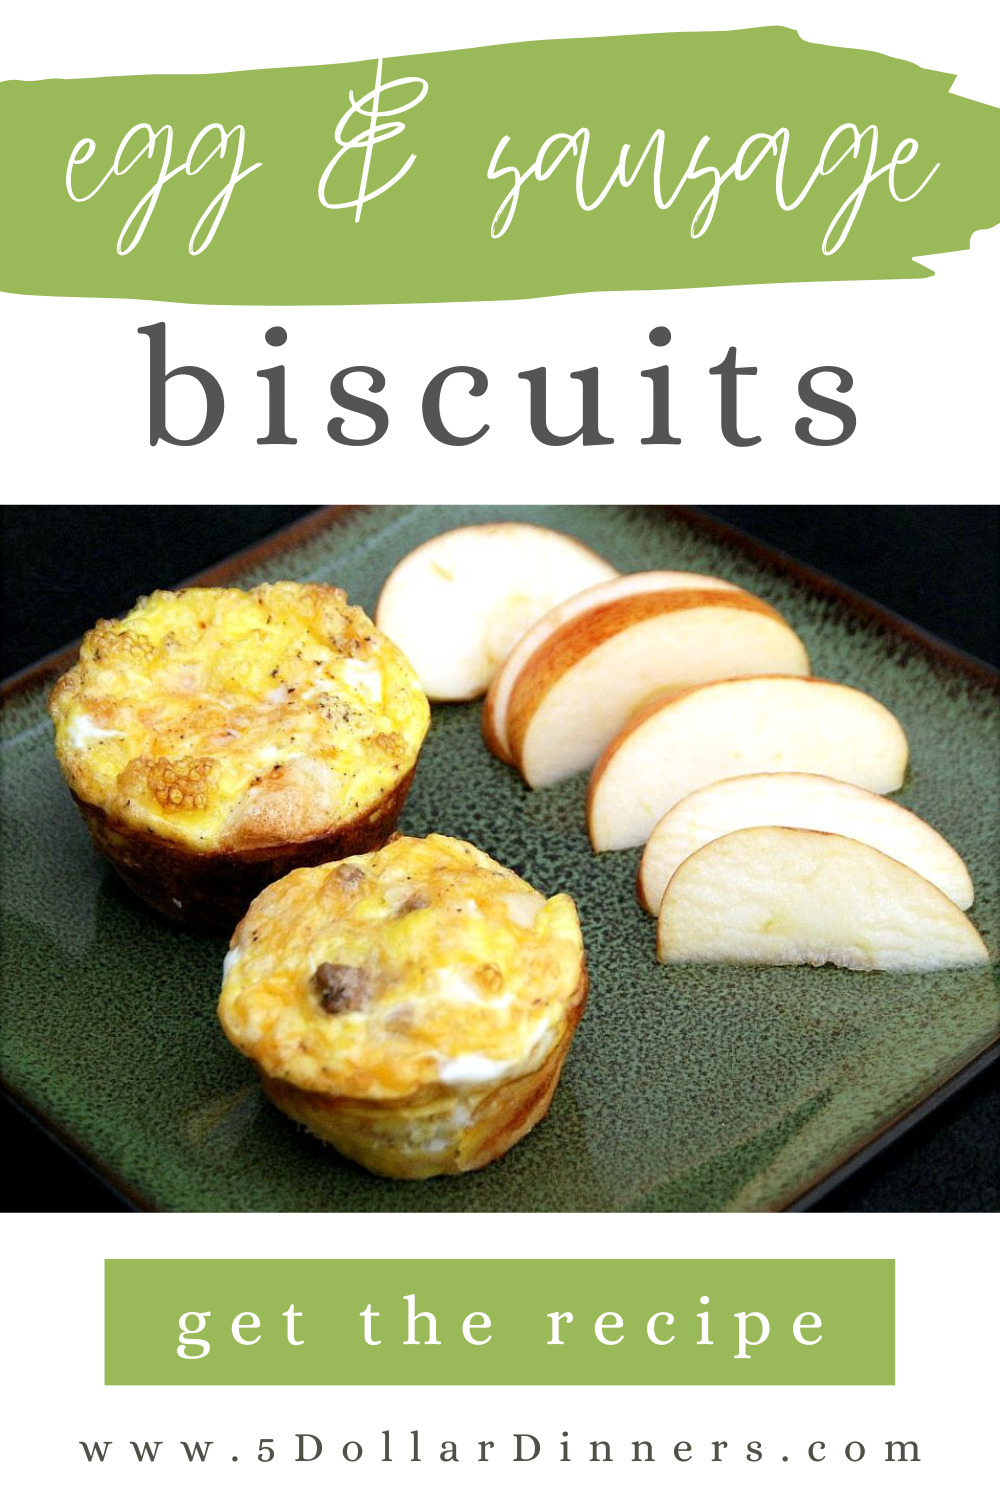 egg and sausage biscuits